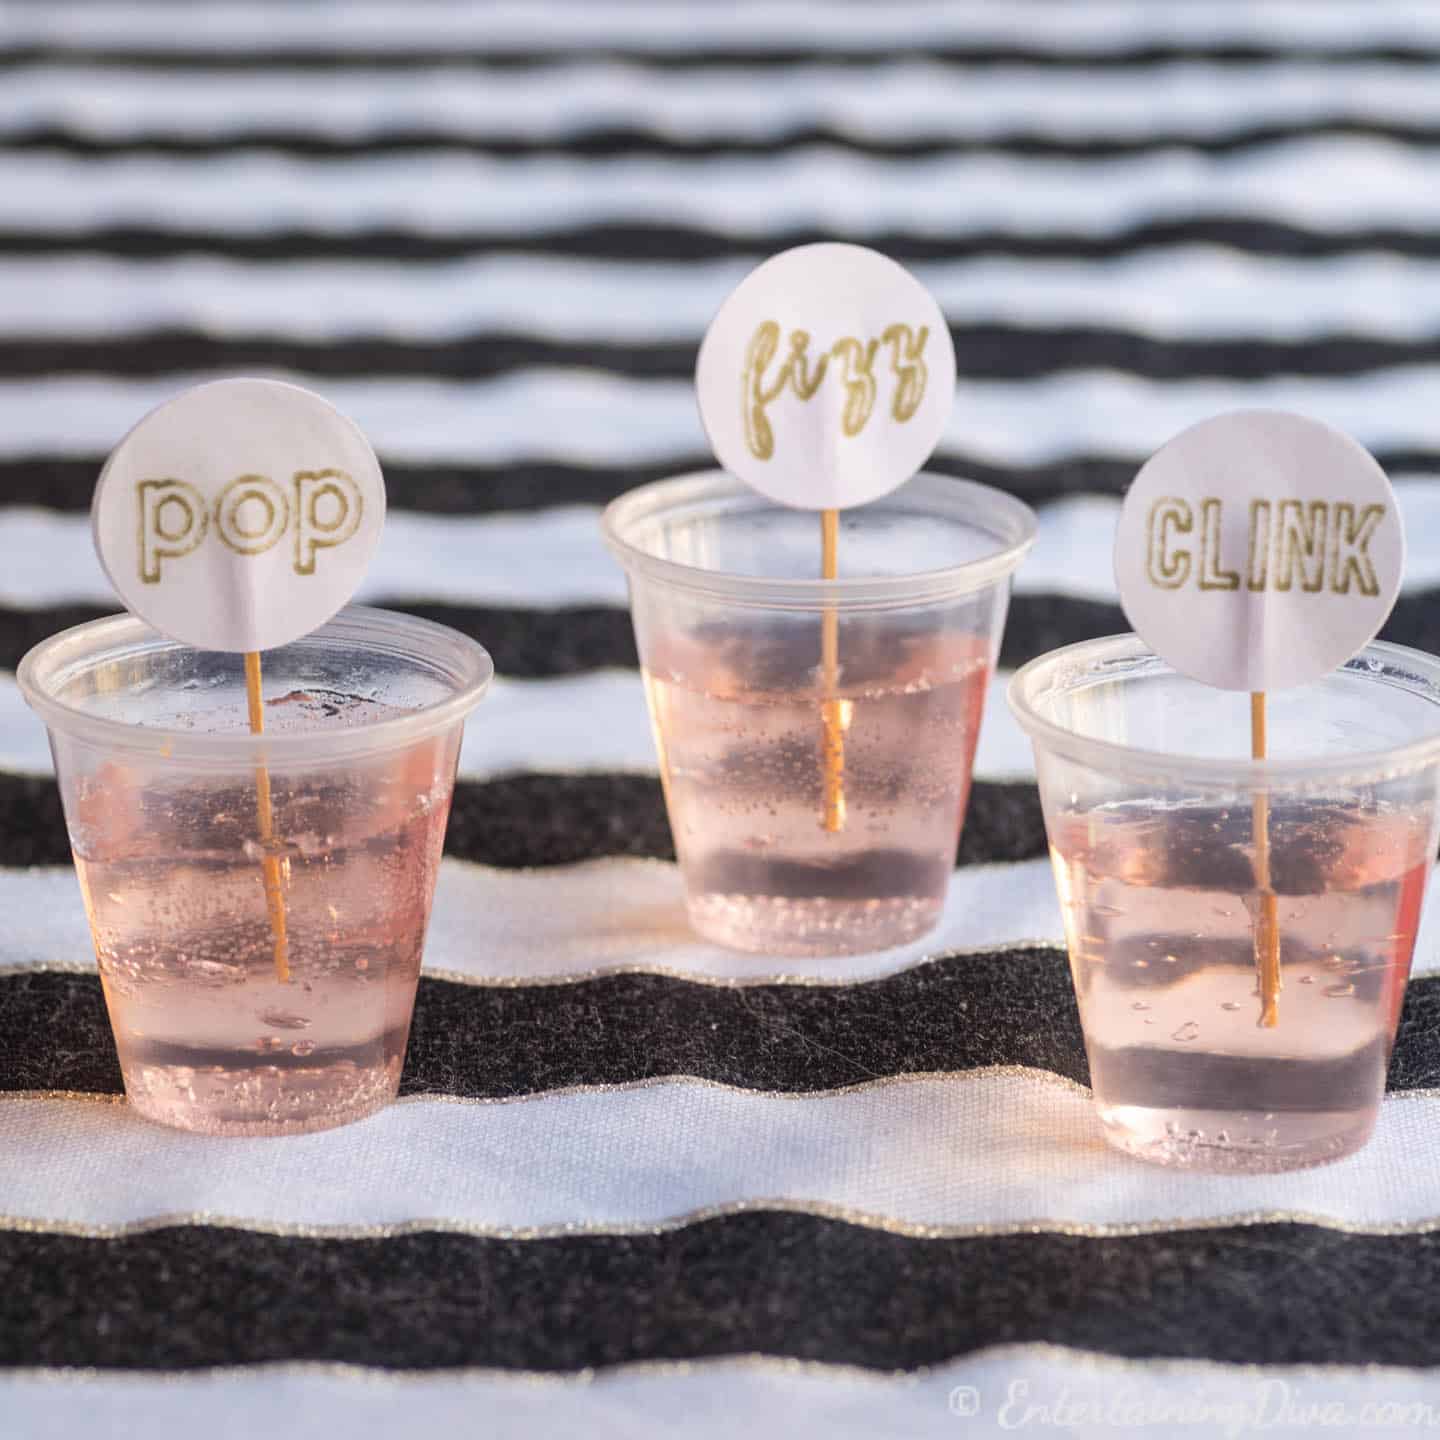 Pink champagne jello shots with pop, fizz, clink toothpicks for a New Year's Eve party